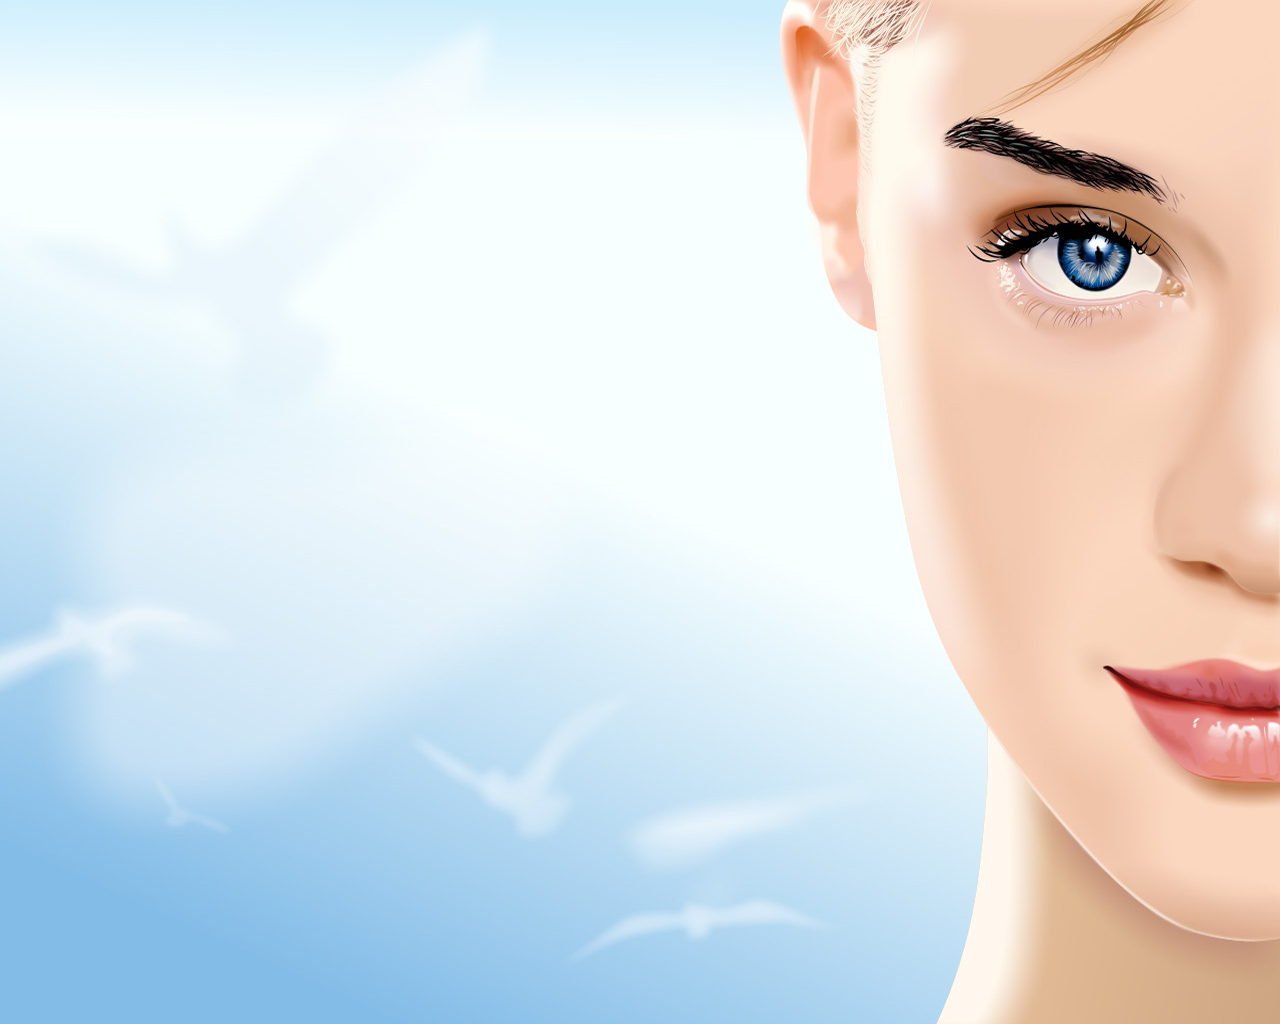 Make Up for Cosmetic Advertising powerpoint background